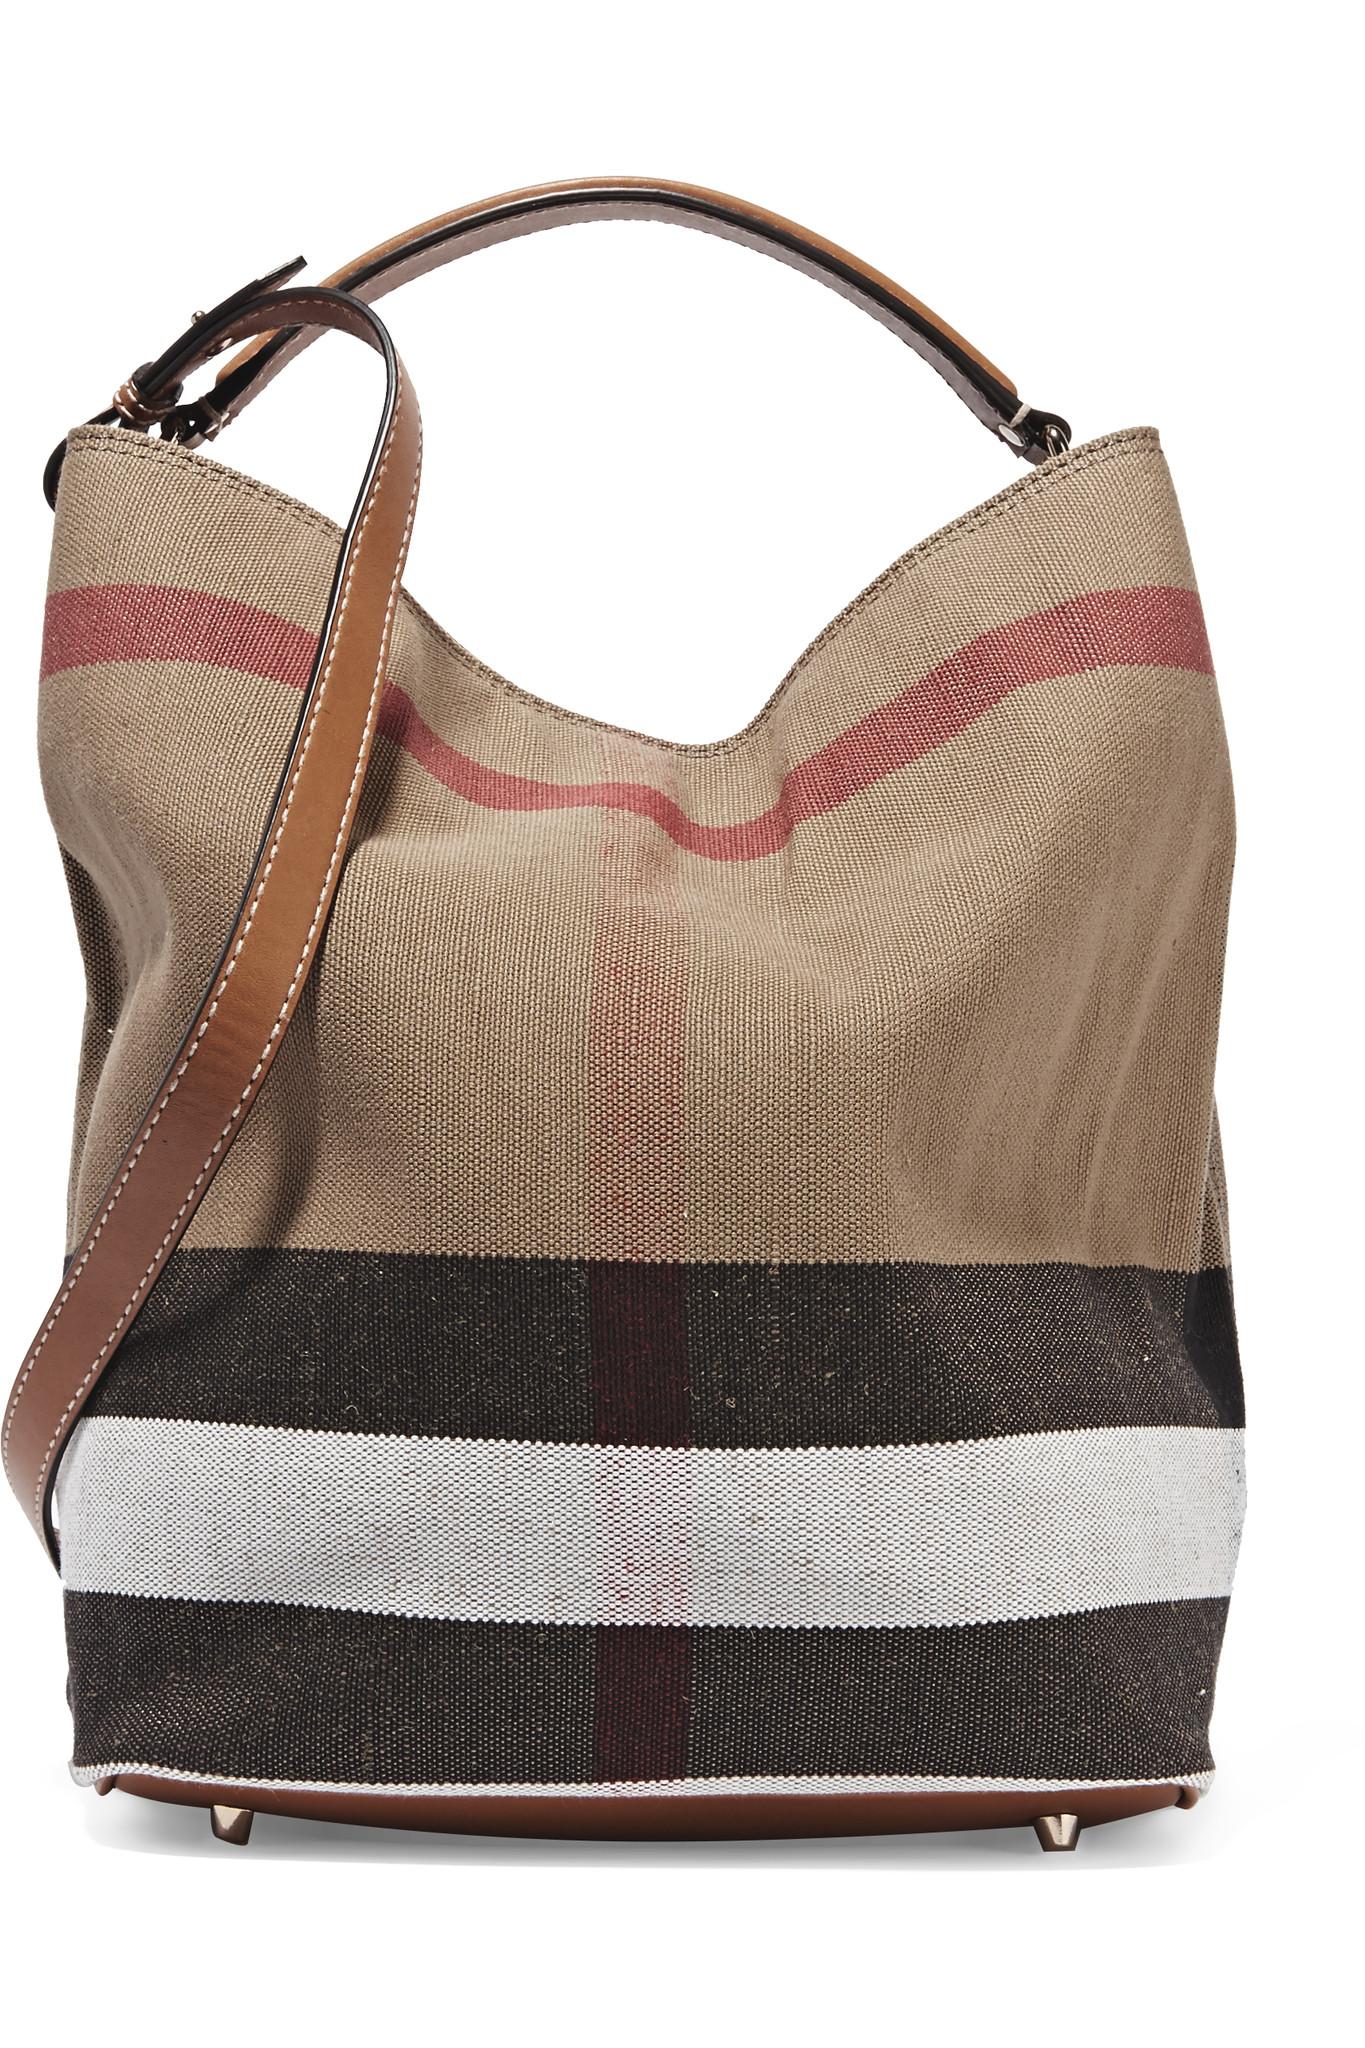 Burberry Leather-trimmed Checked Canvas Hobo Bag in Brown - Lyst